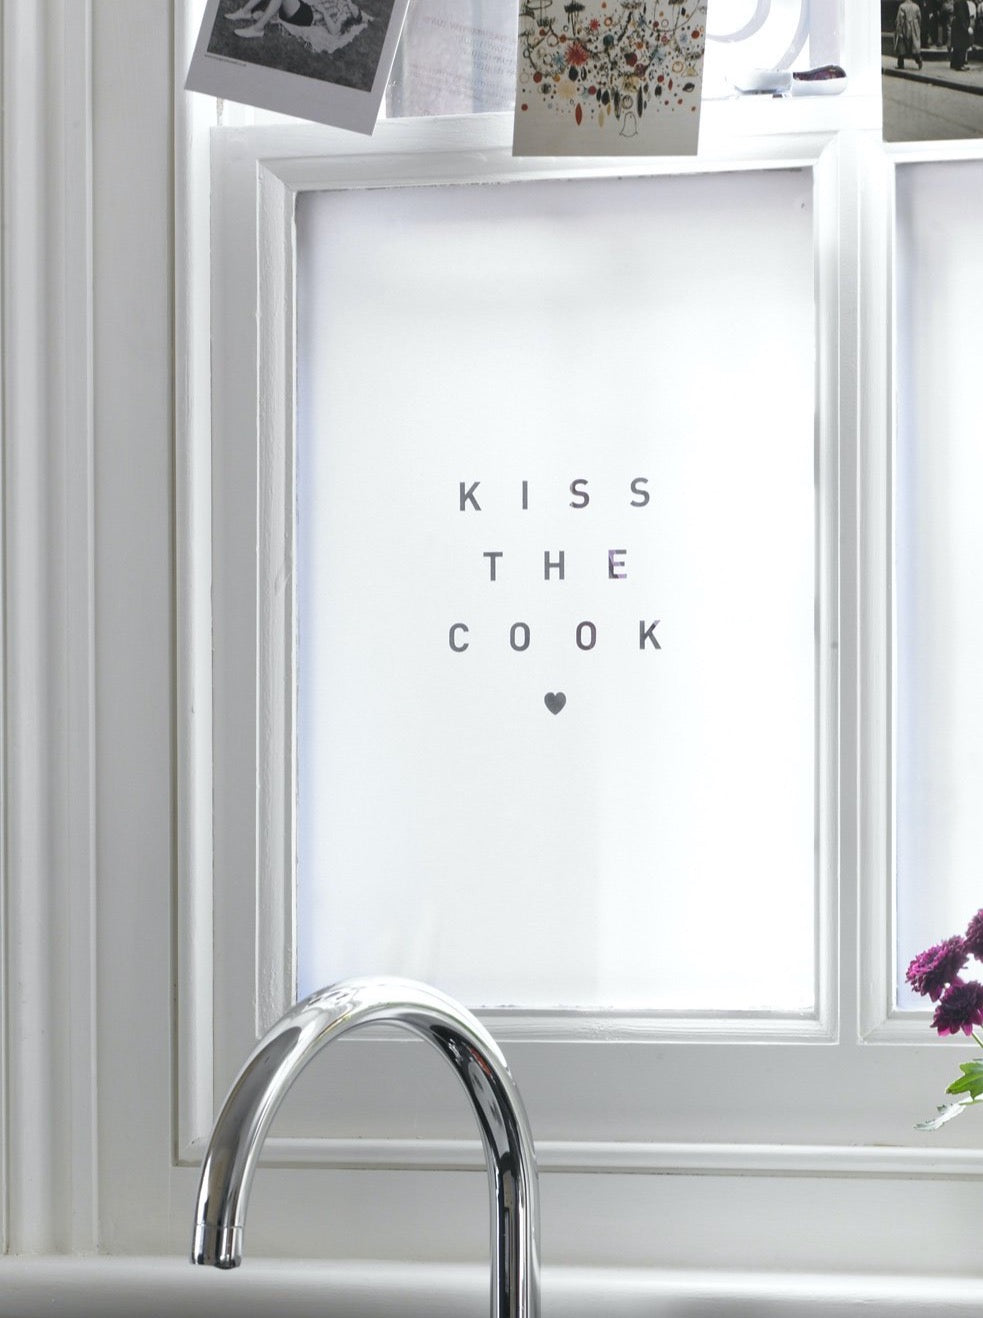 Kiss the Cook.